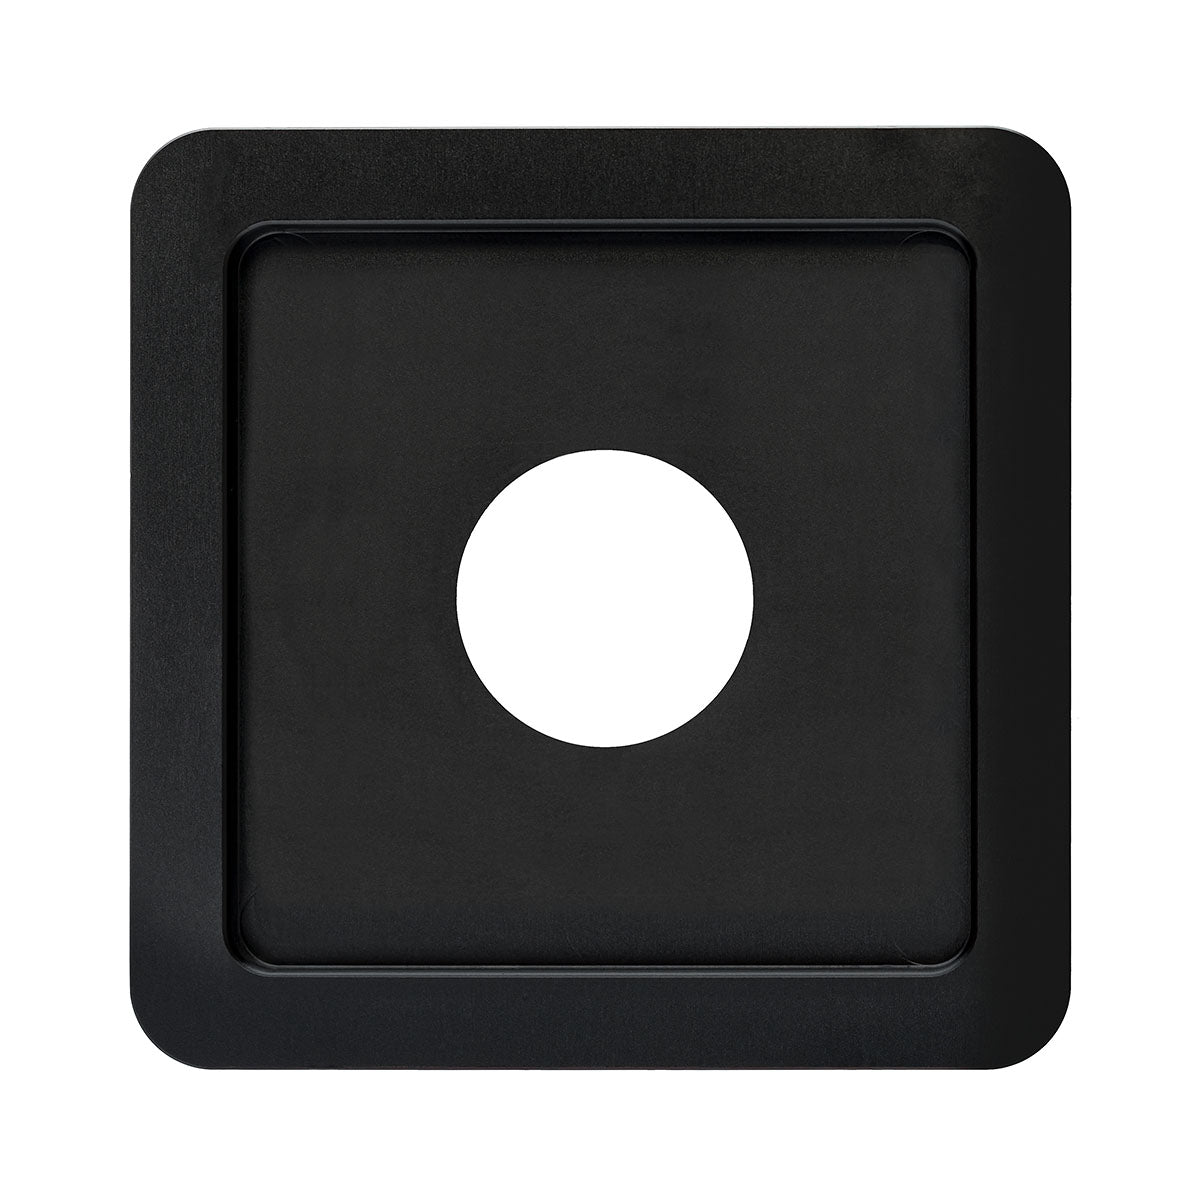 Lens Board 110x110 Recessed 7 mm, Size 0